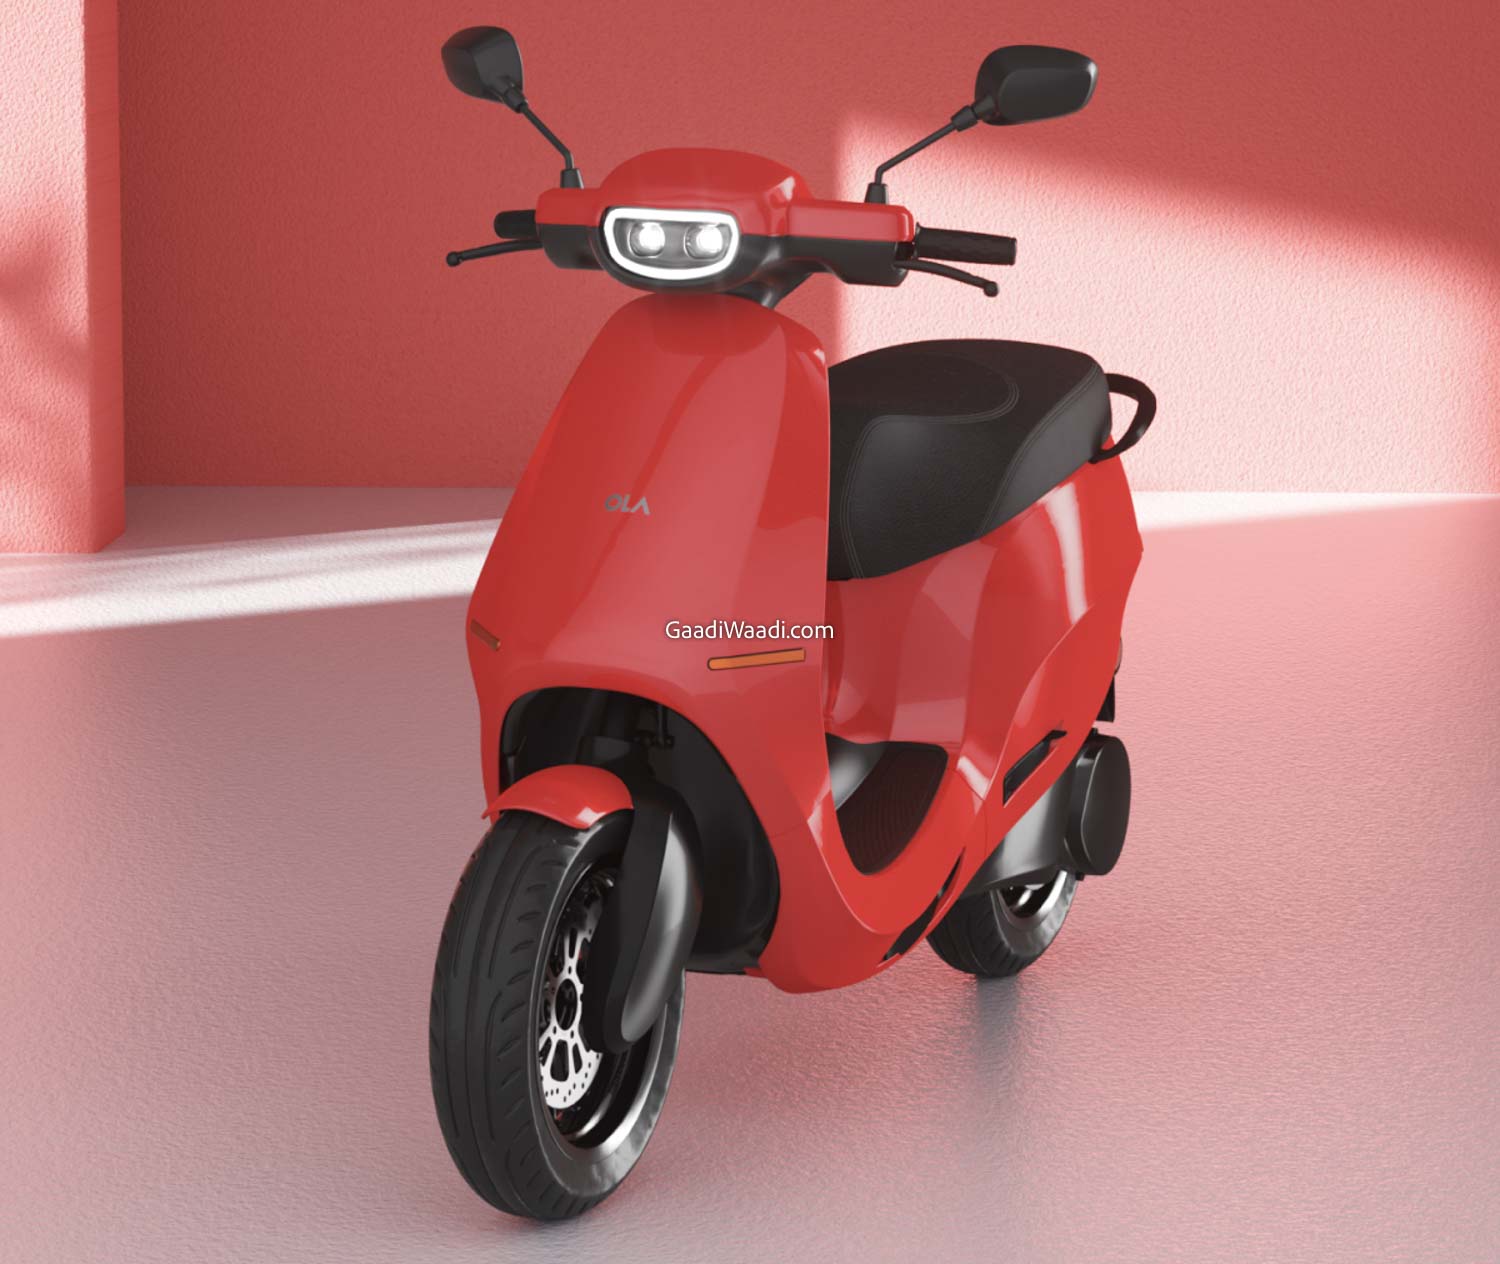 Enkelhed Anholdelse rense Top 5 Electric Scooters To Buy In India - Ola S1 To Ather 450X